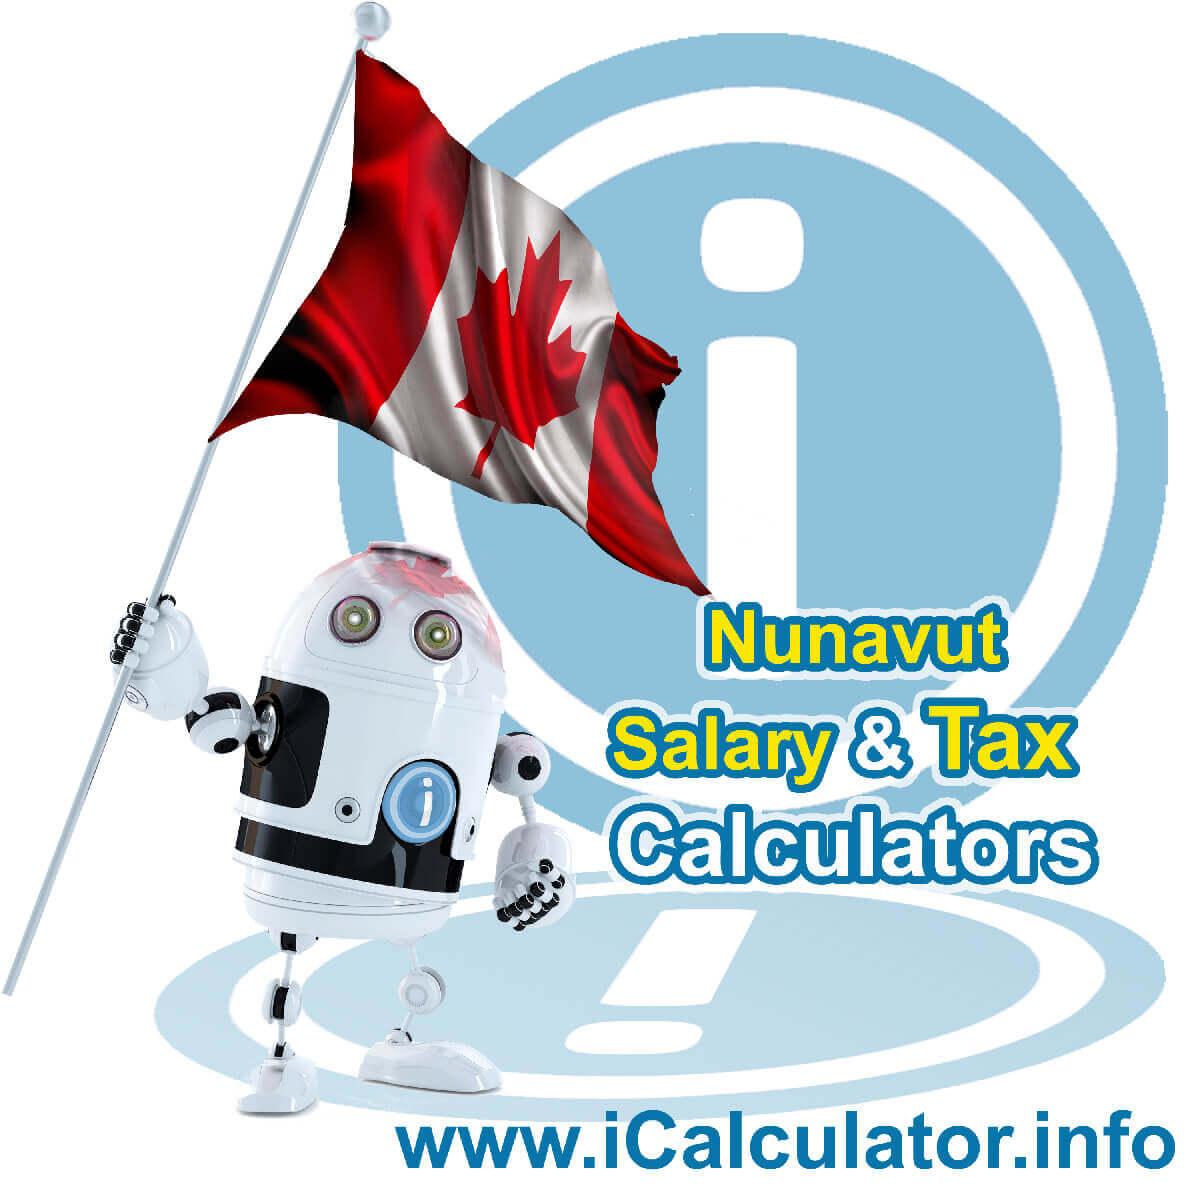 Canada Tax Calculator. This image shows the Canada flag and information relating to the tax formula for the Canada Salary Calculator